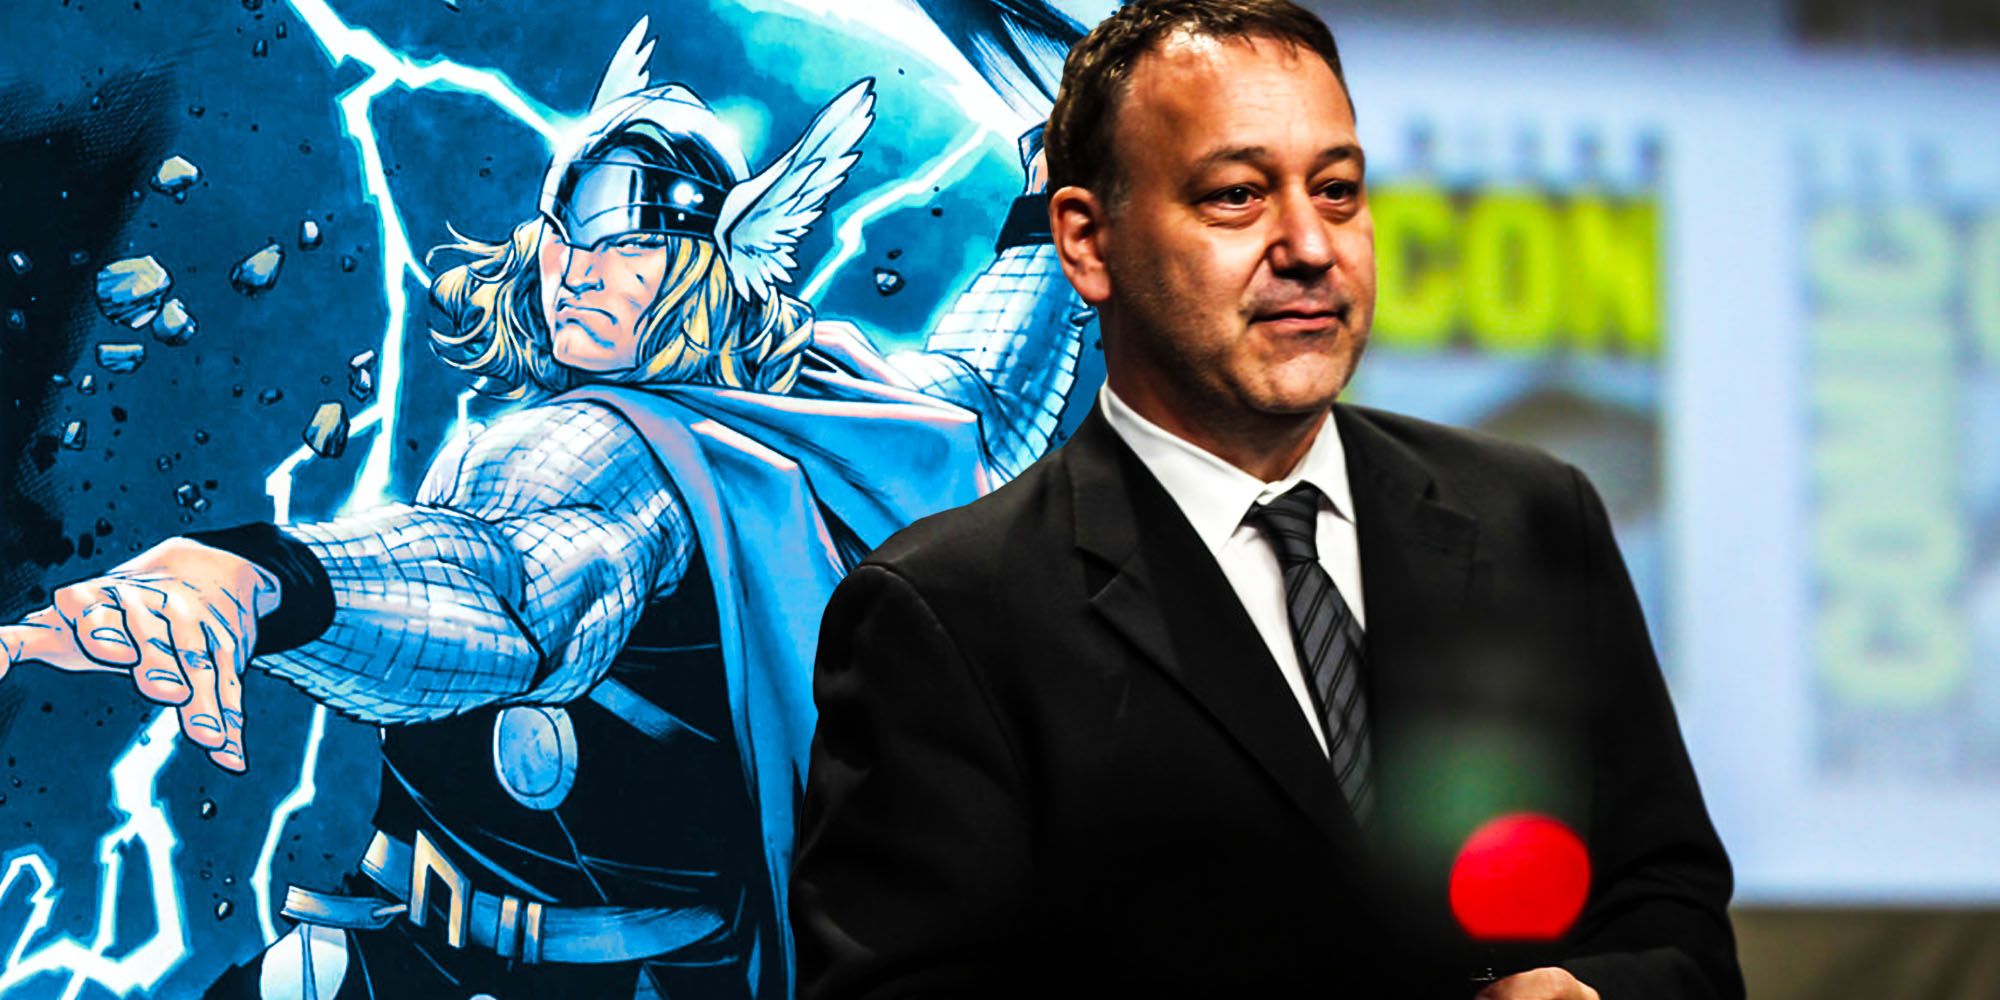 Blended image of a Thor comic book and Sam Raimi